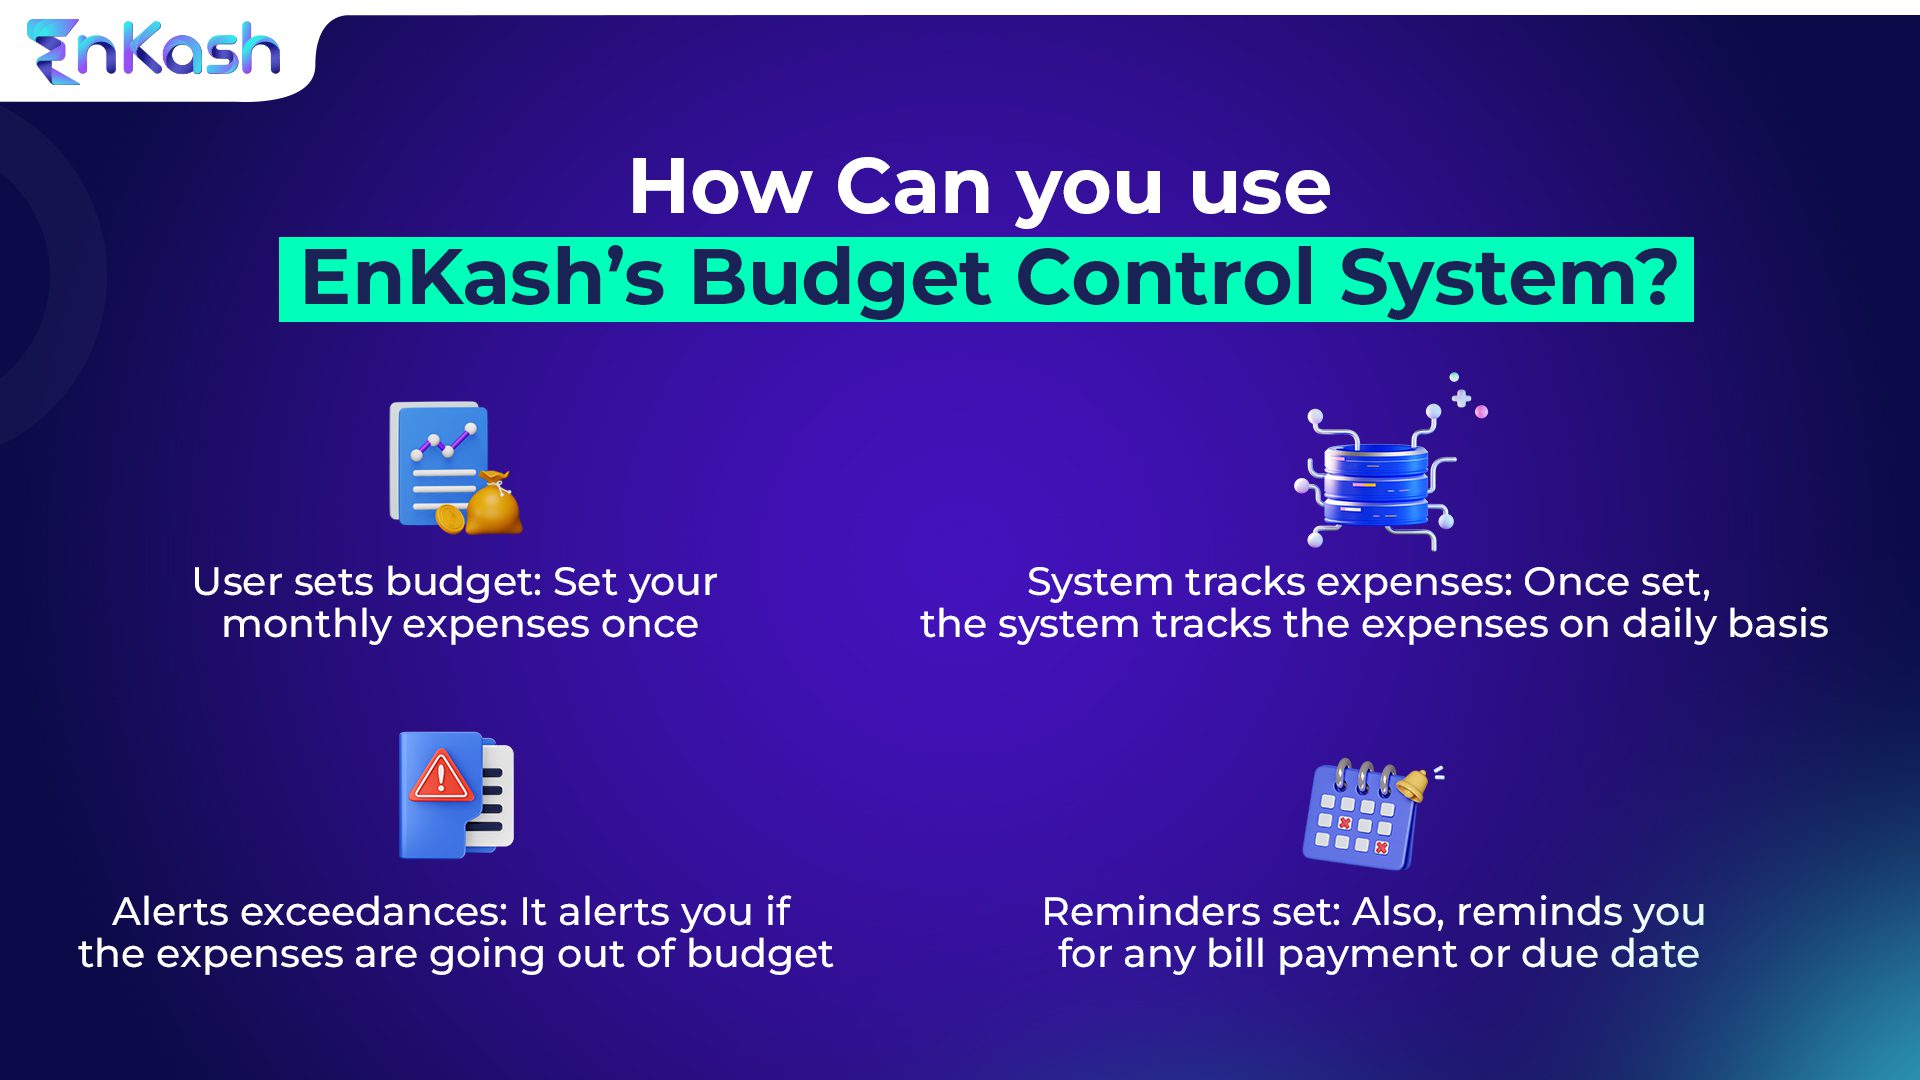 Simplify Your Finances with a Budget Control System
